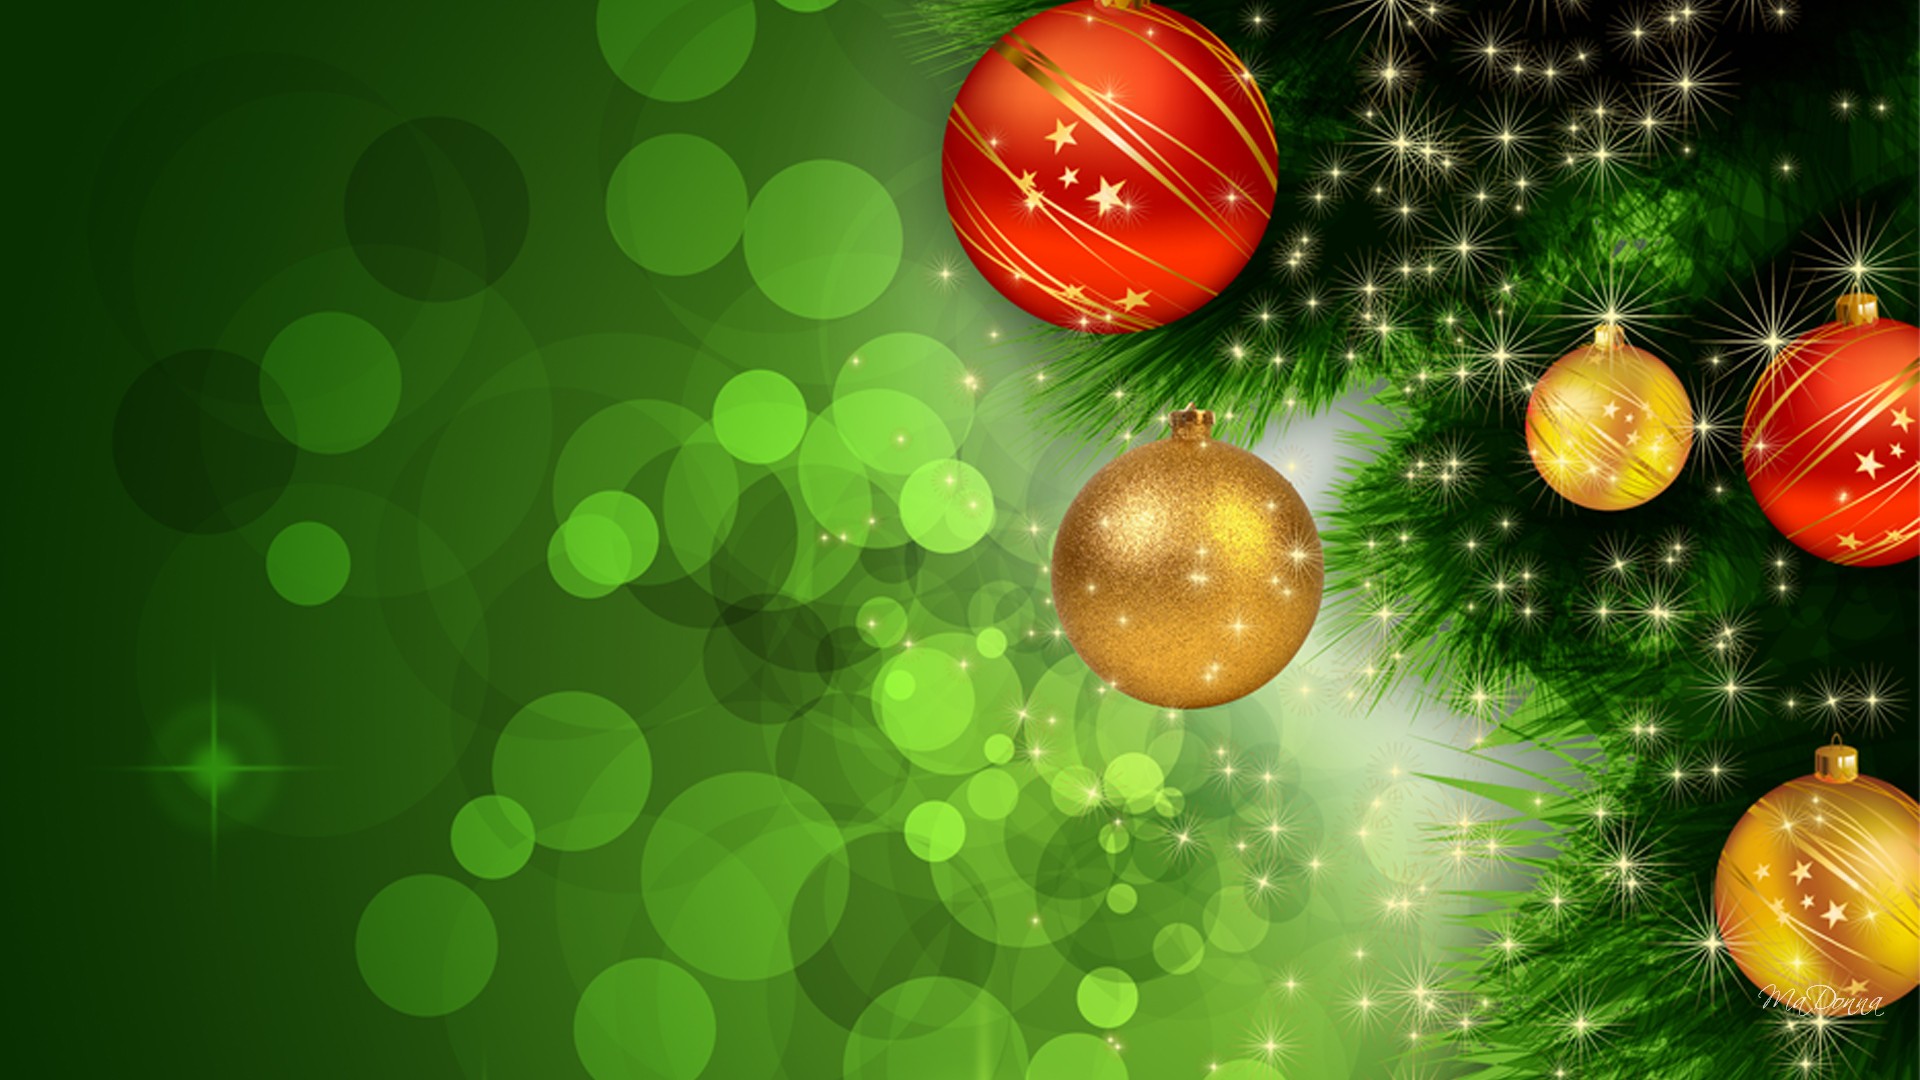 Abstract Christmas Green Background Wallpaper I HD Image